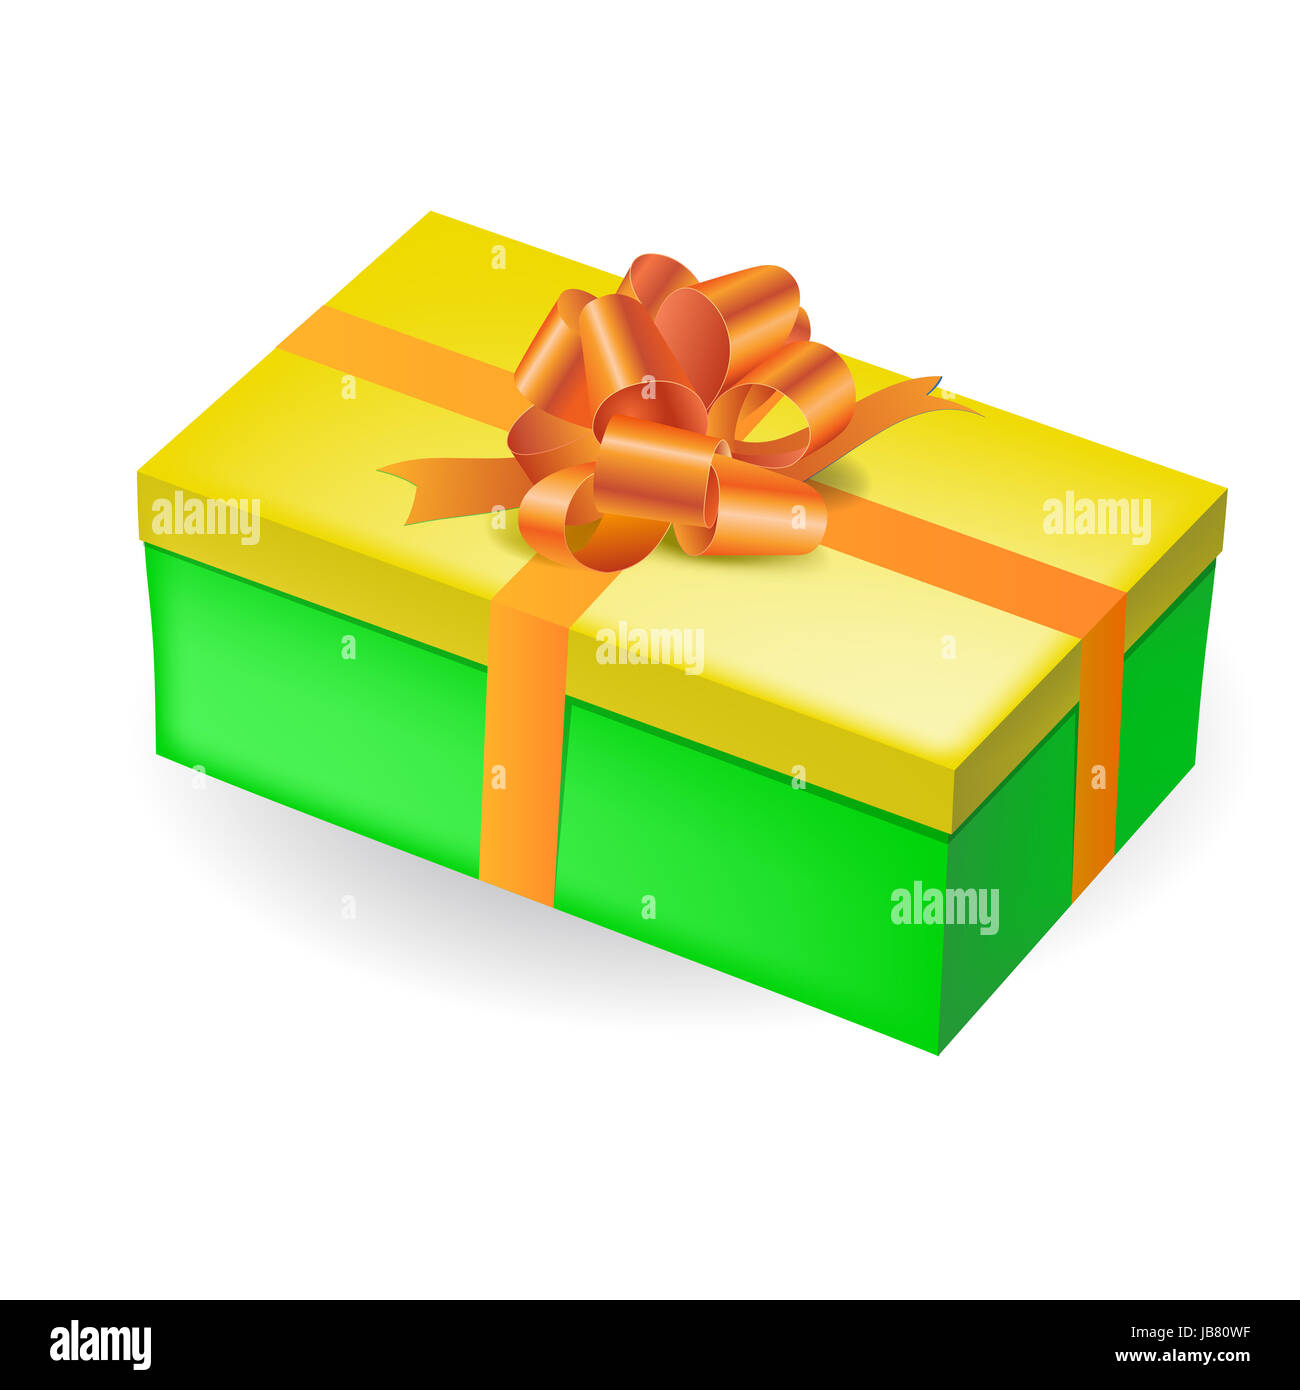 Download Rectangular Green Gift Box With Yellow Top And Shiny Orange Bow On Stock Photo Alamy Yellowimages Mockups